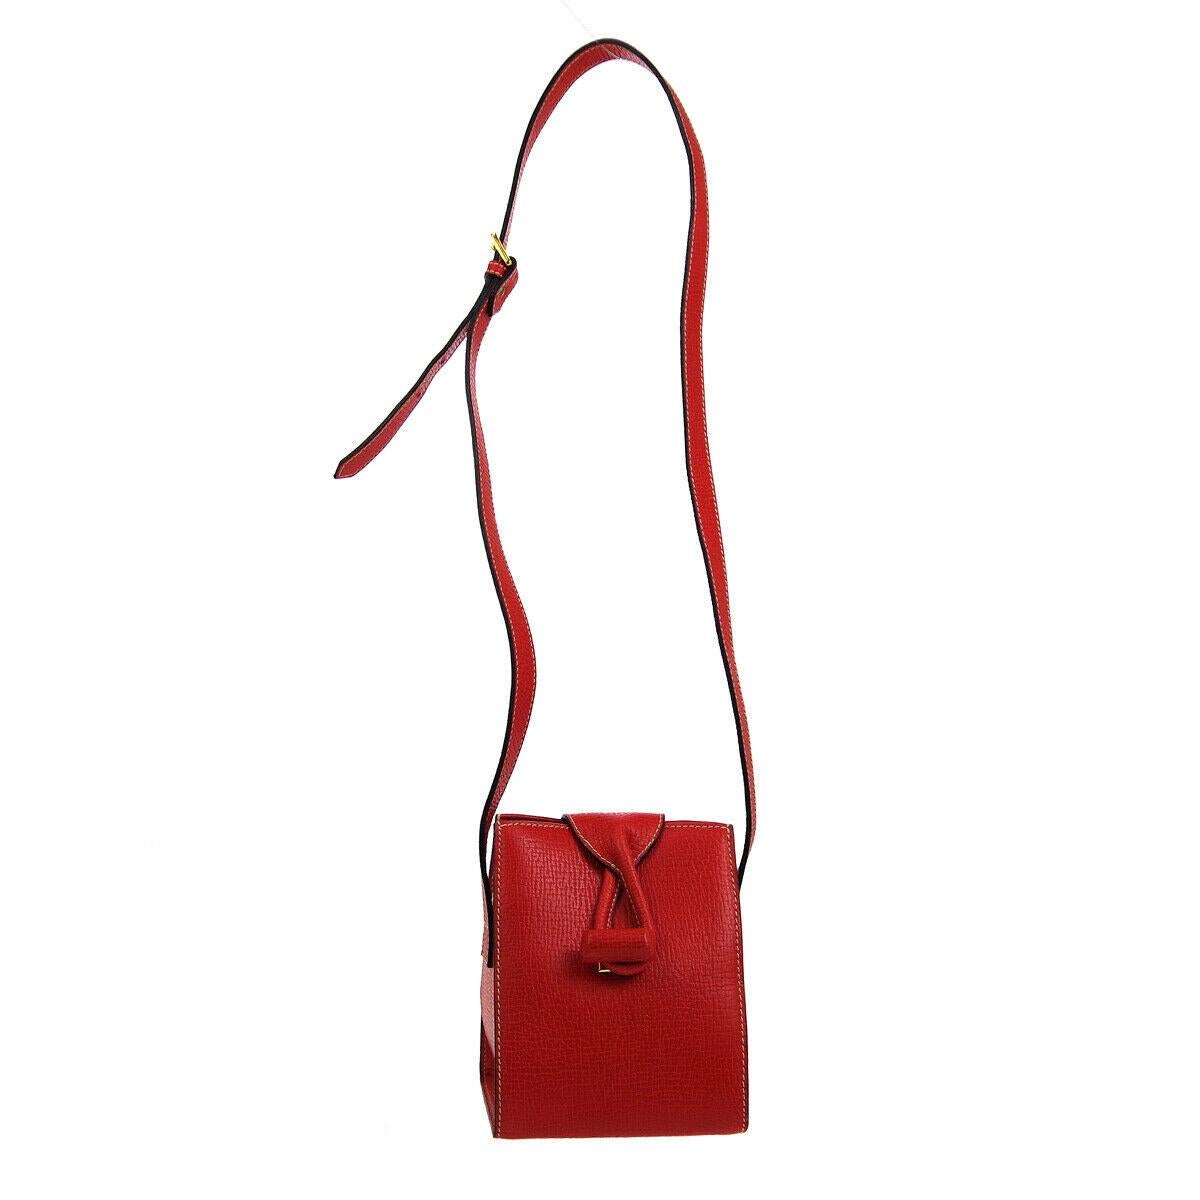 Loewe Red Leather Evening Small Box Mini Toggle Shoulder Flap Bag

Leather
Leather lining
Toggle closure
Made in Italy
Shoulder strap drop 18.5-20.5